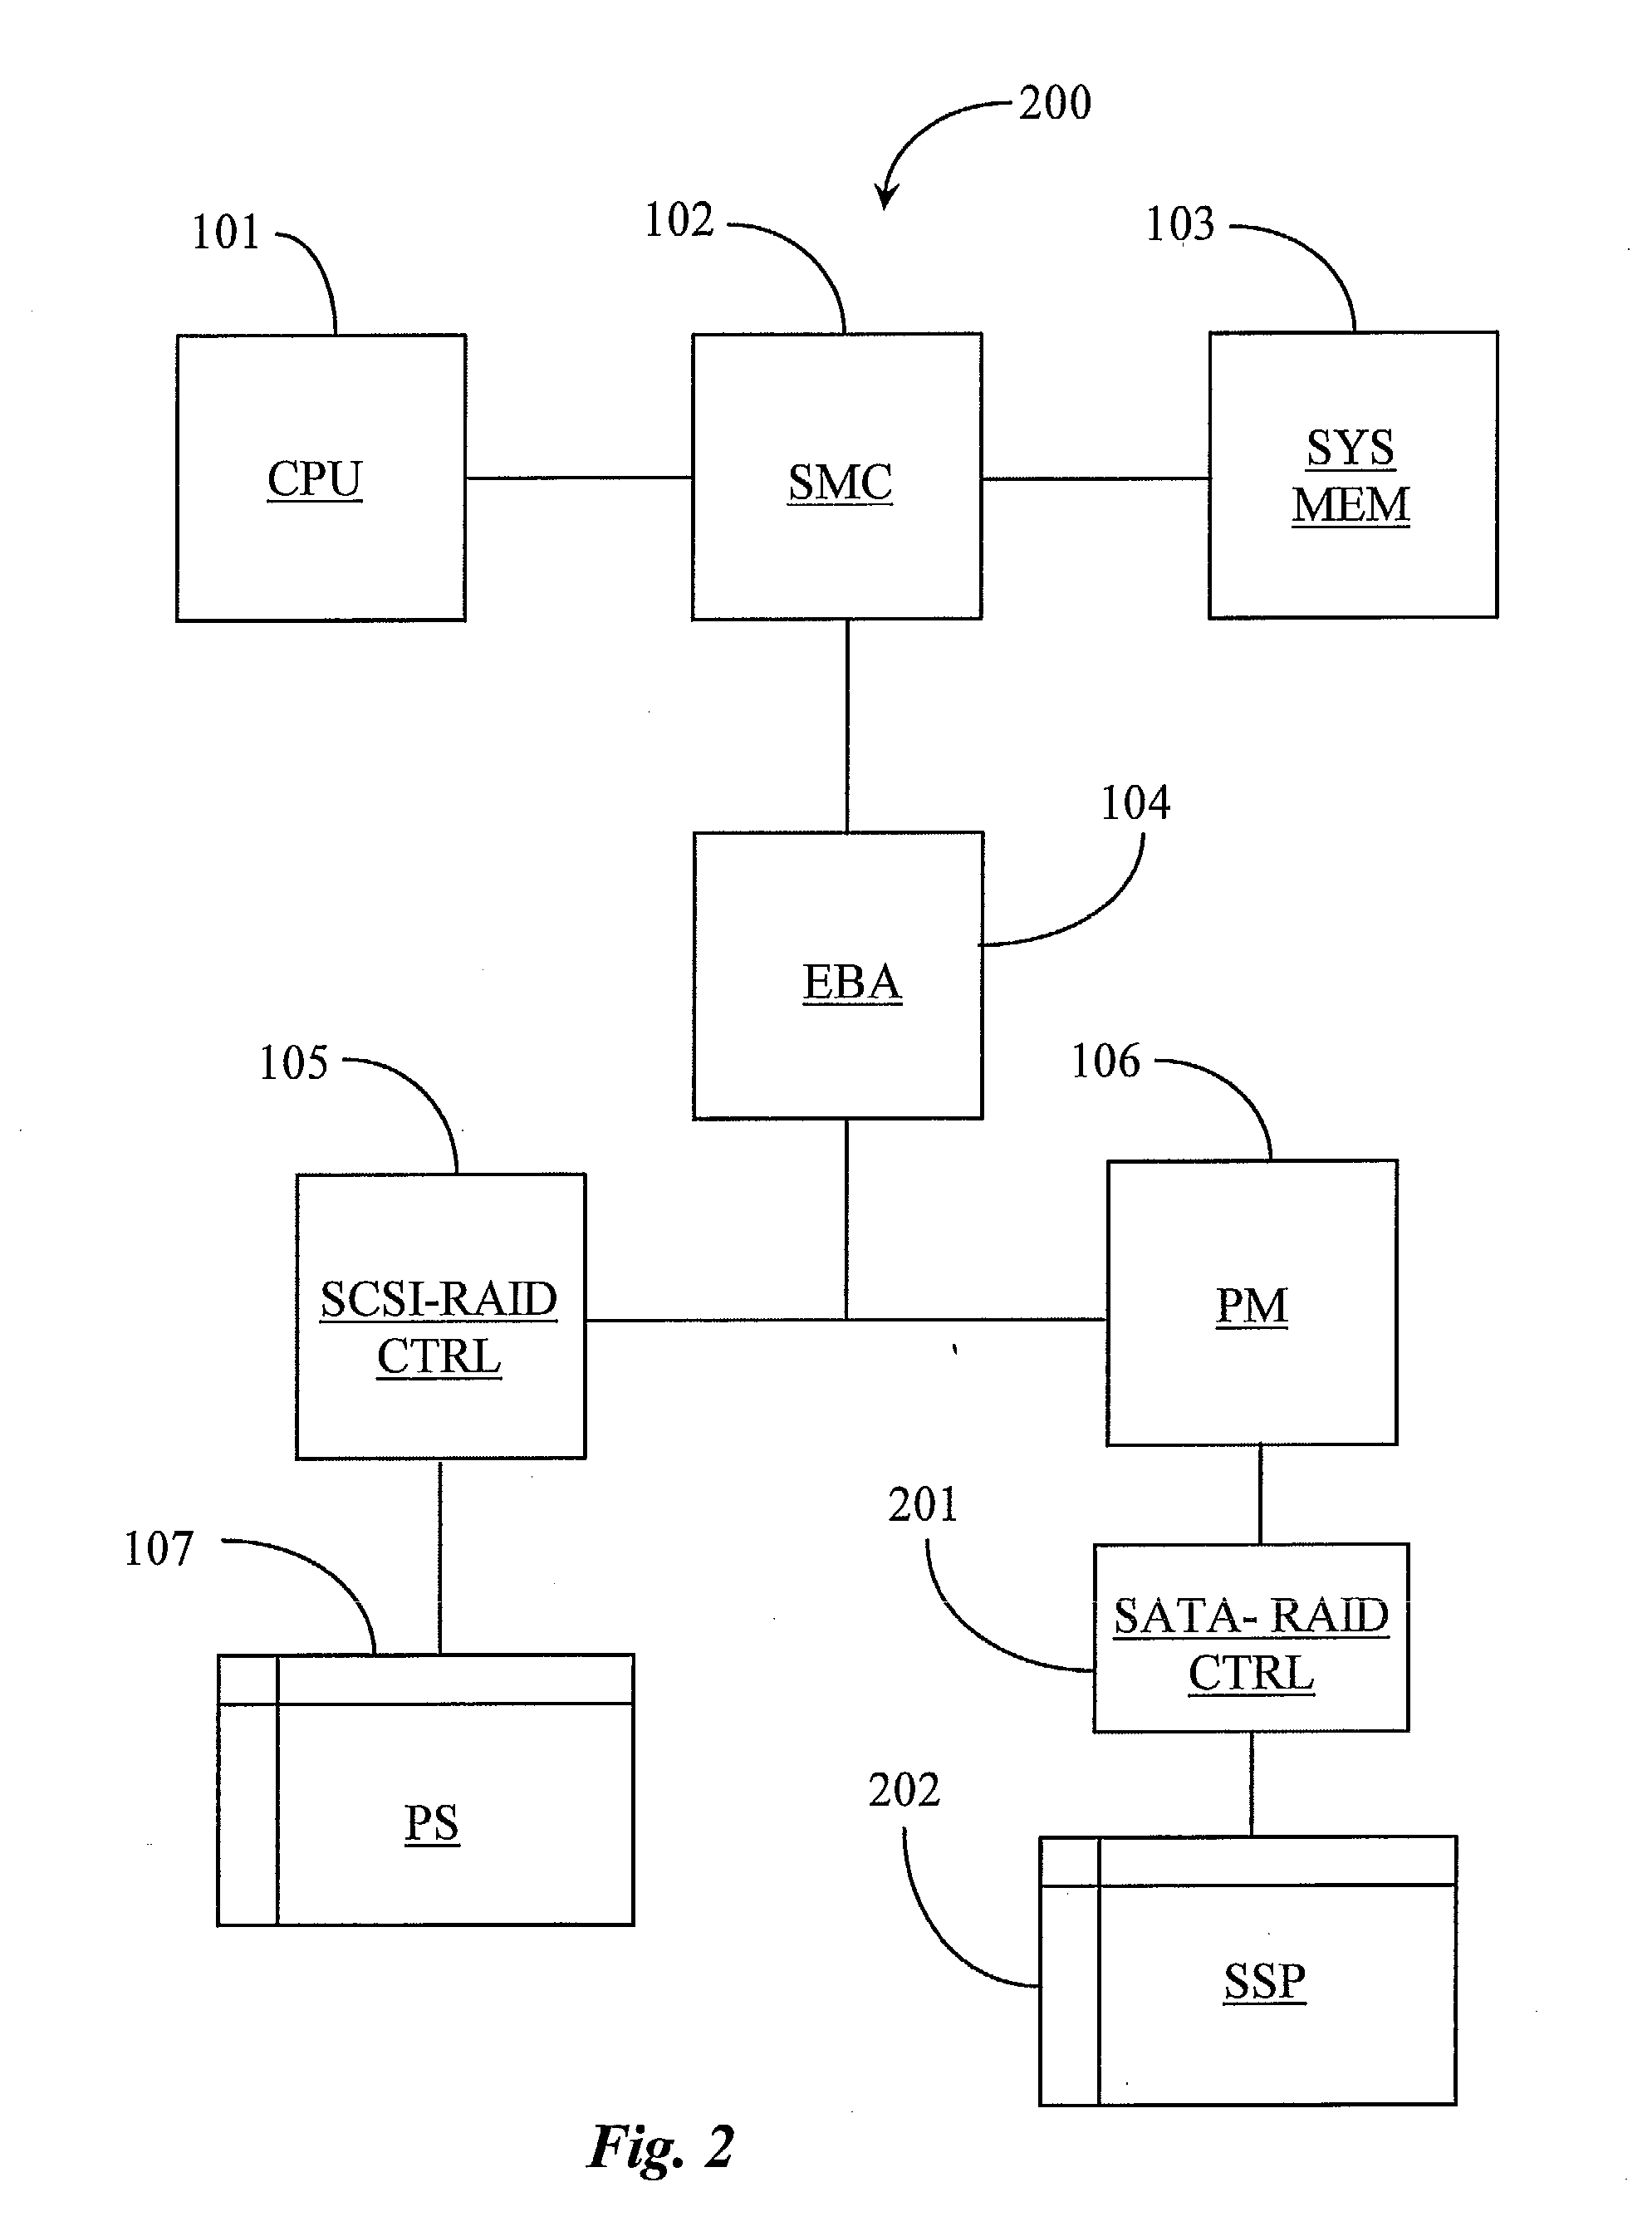 System for Enabling Secure and Automatic Data Backup and Instant Recovery